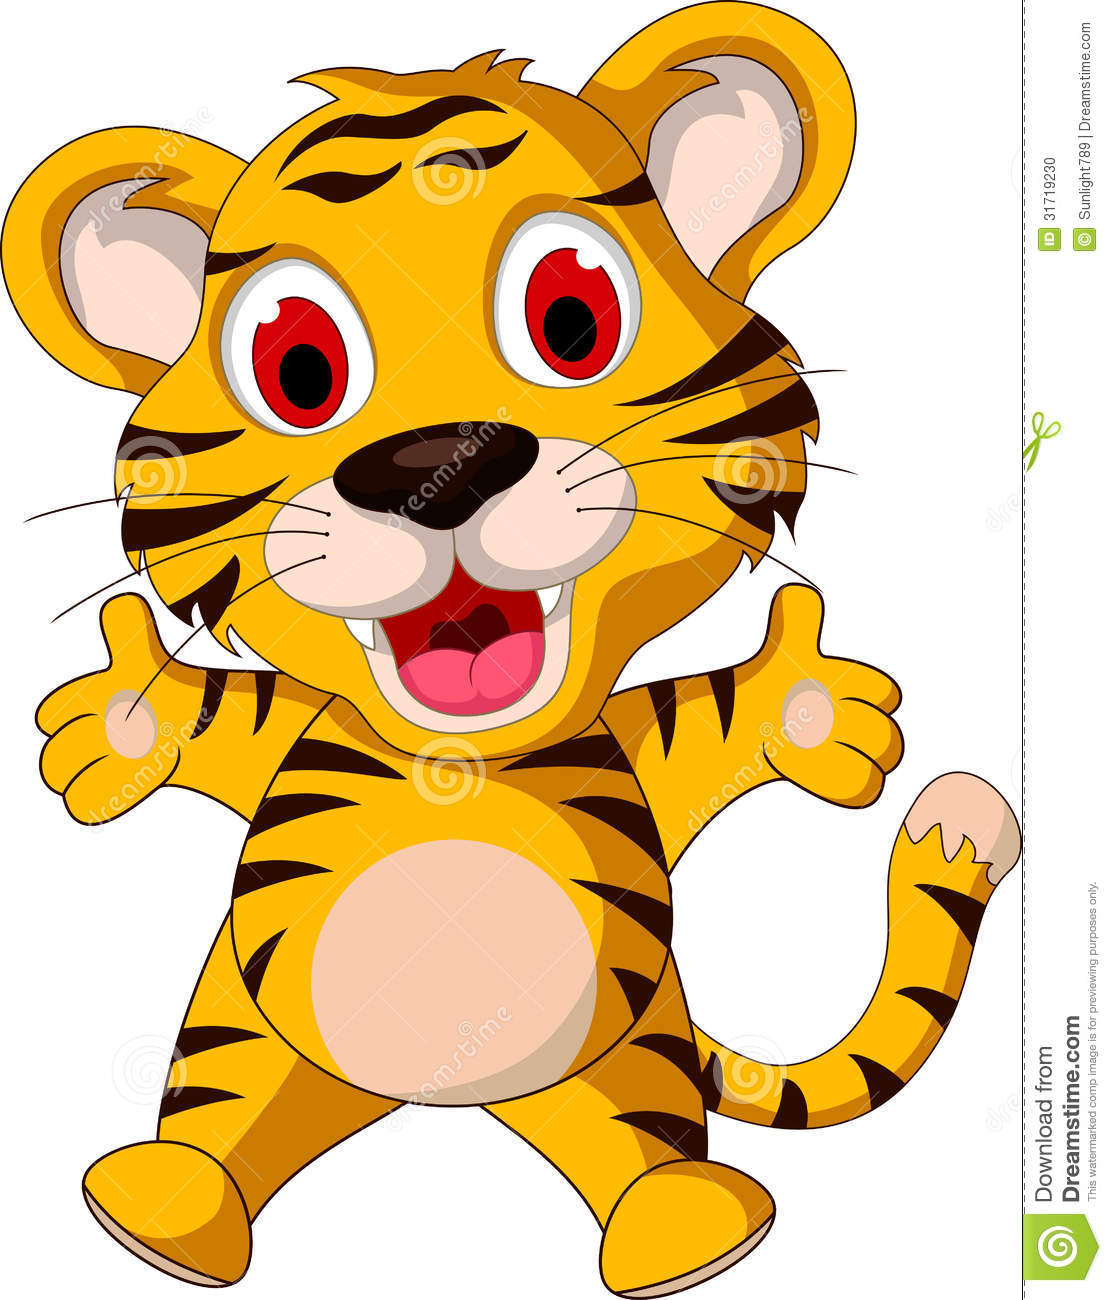 Cute Tiger Clipart Black And White   Clipart Panda   Free Clipart    